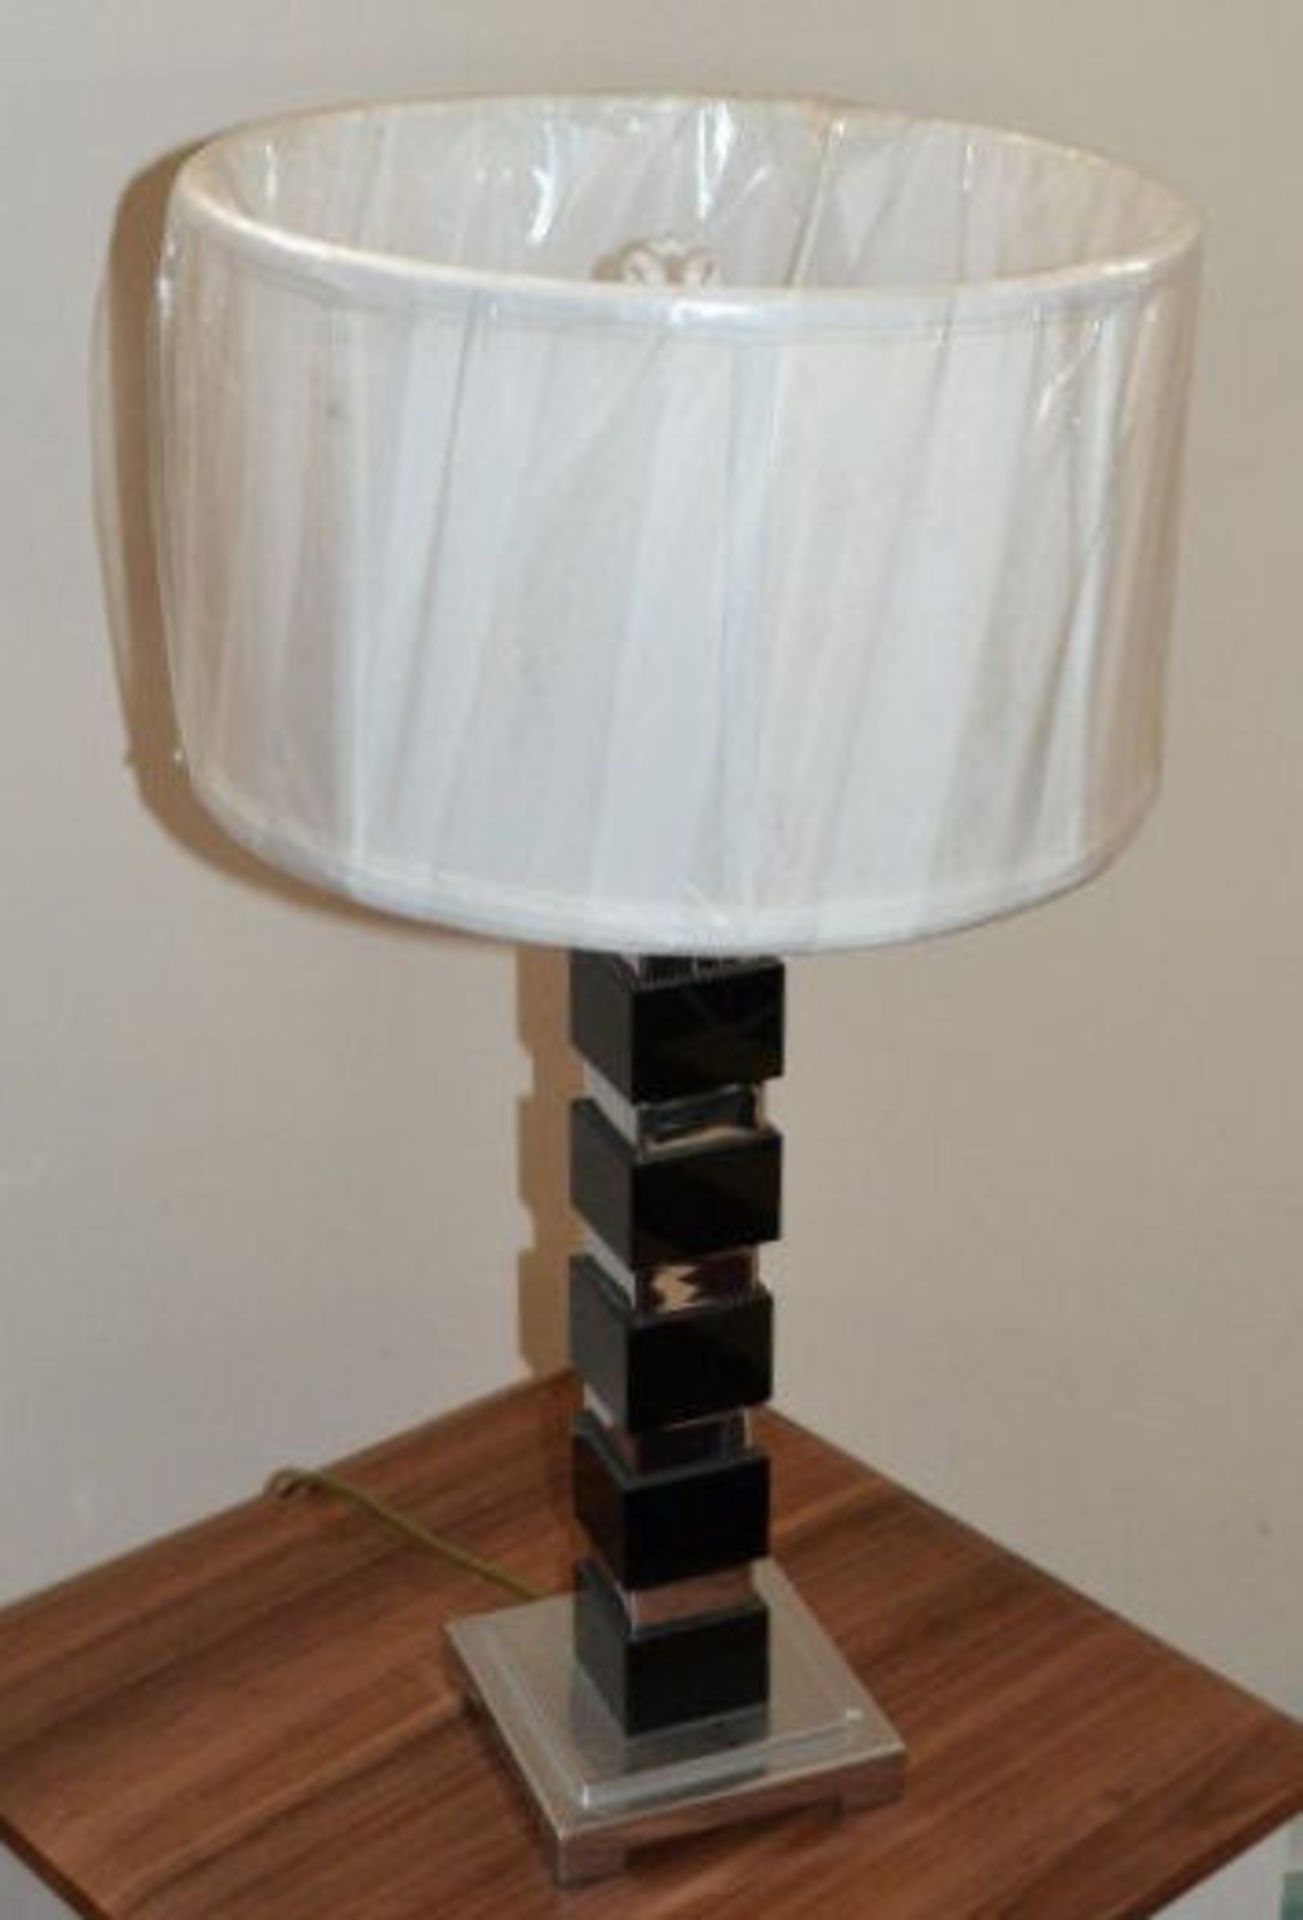 1 x Silver And Black Lamp, White Shade. Total Height 62cm. - Image 3 of 5